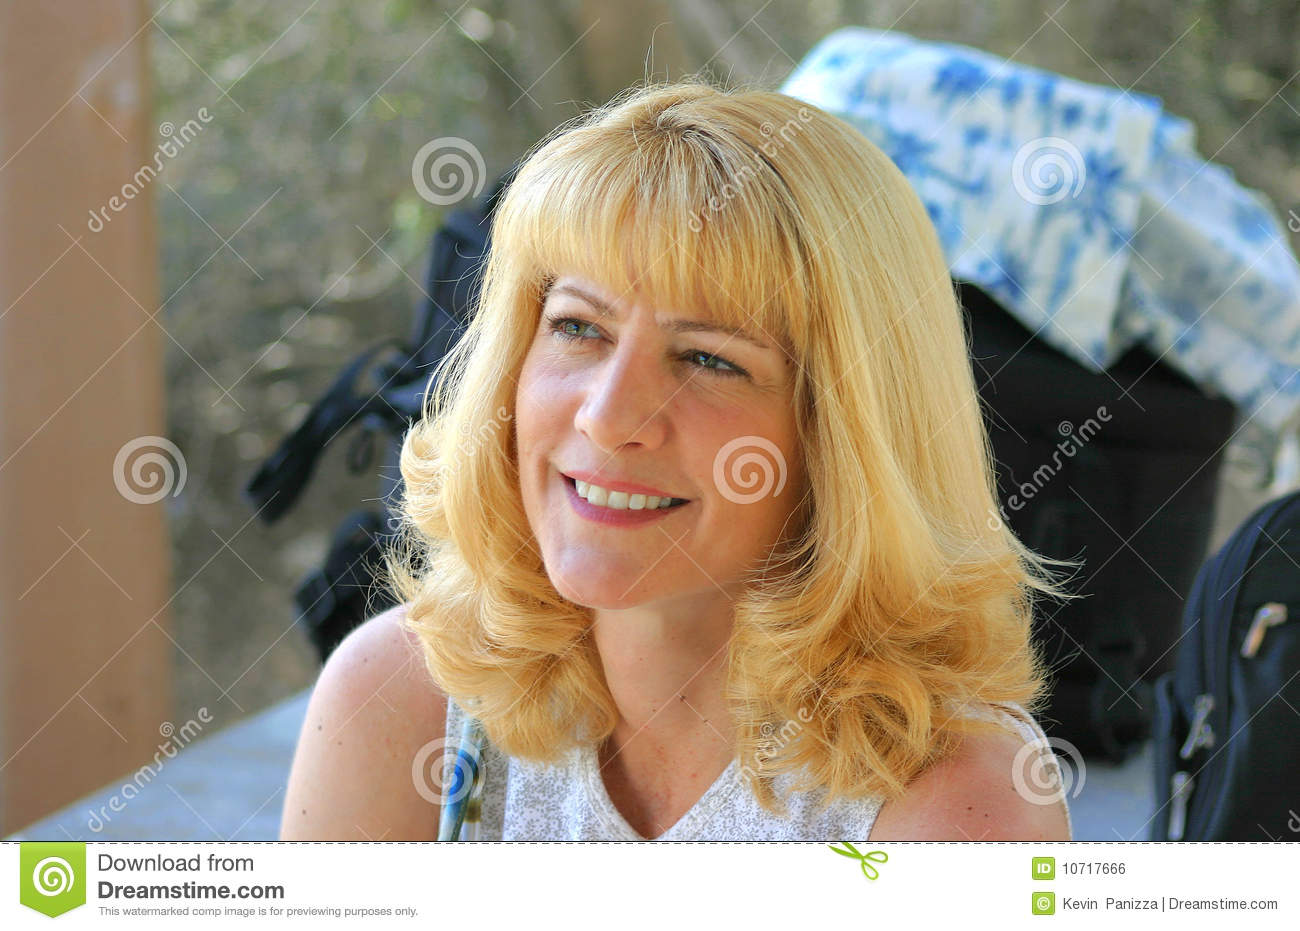 Cute Blonde Mom Looking Up Royalty Free Stock Image   Image  10717666